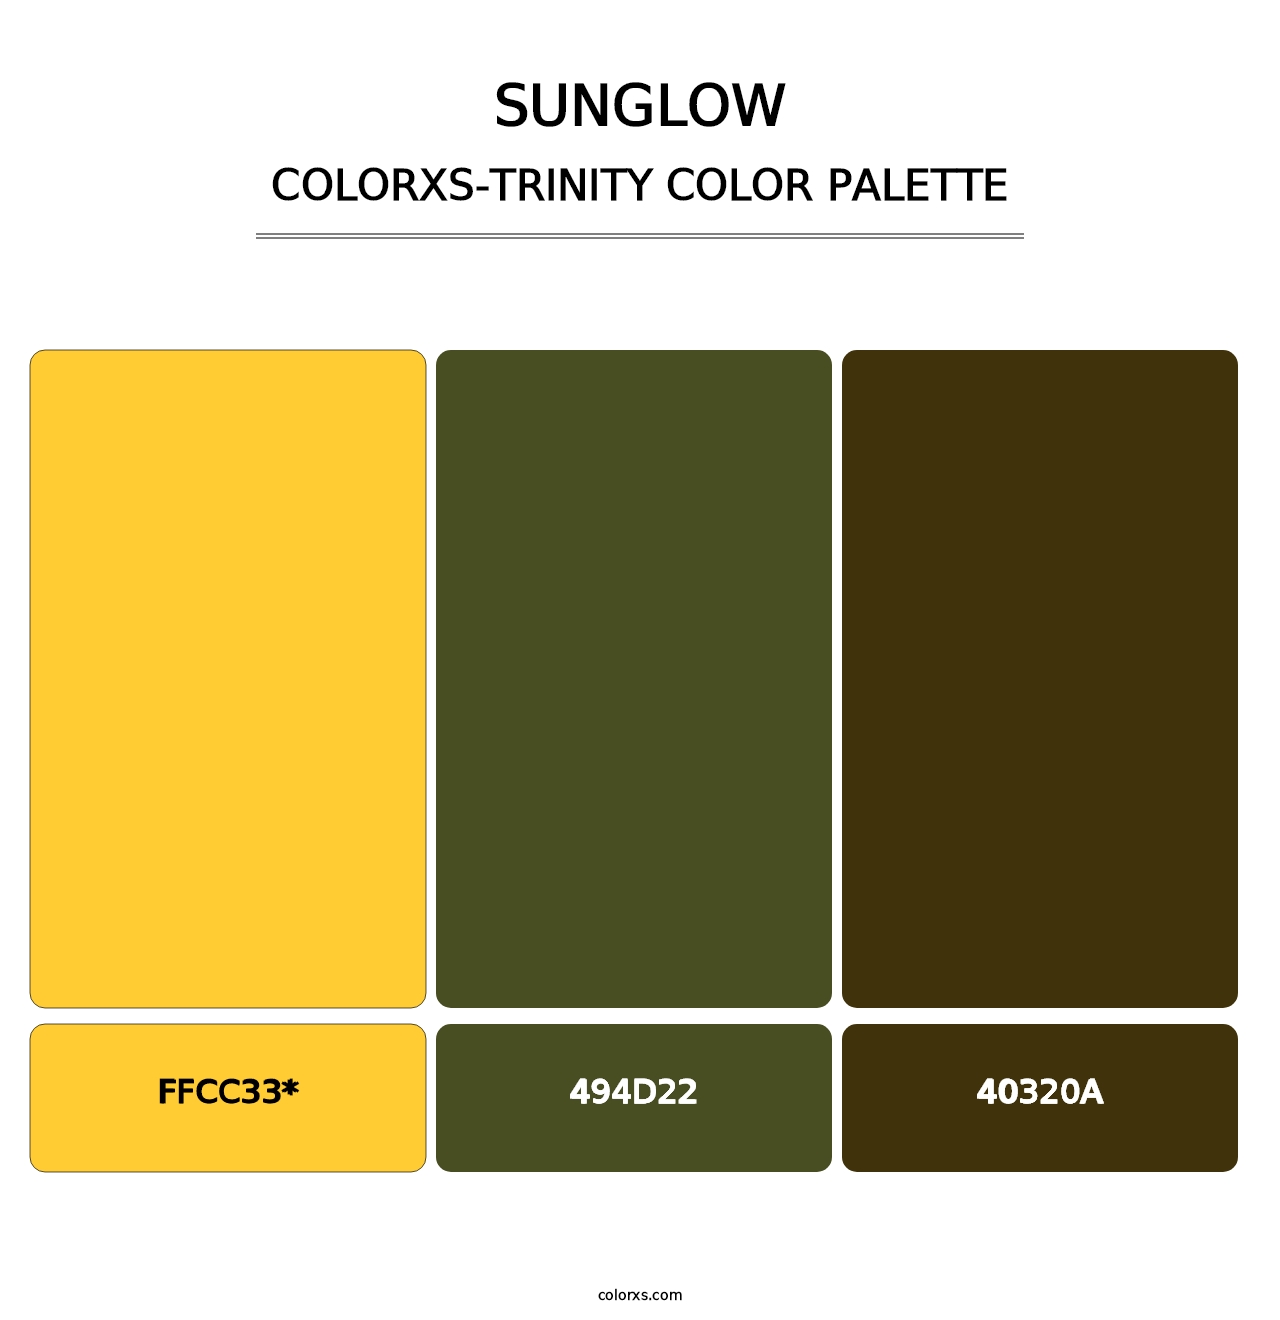 Sunglow - Colorxs Trinity Palette